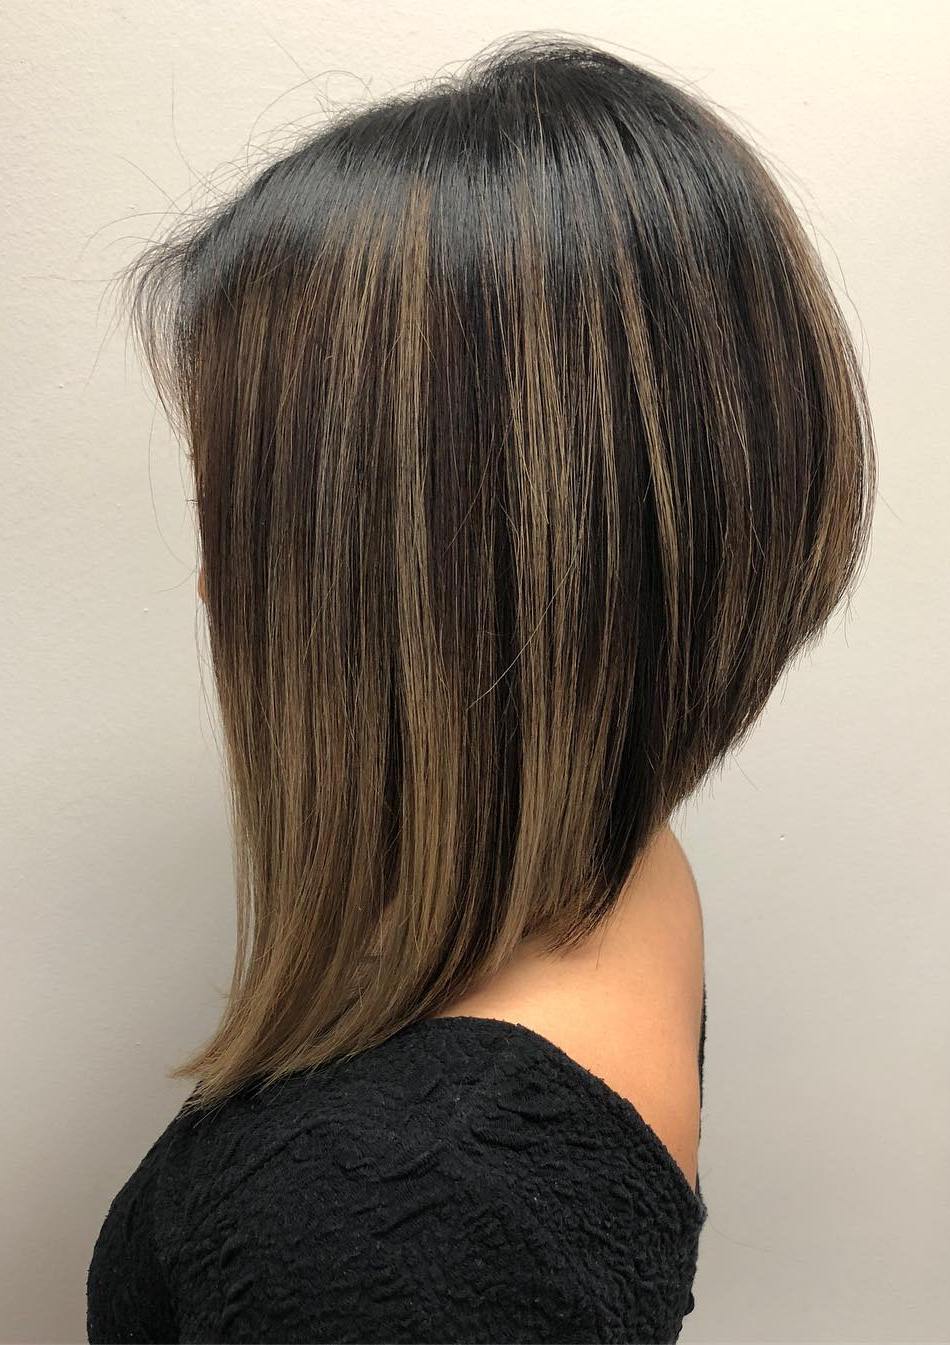 Picture Of Inverted Bob